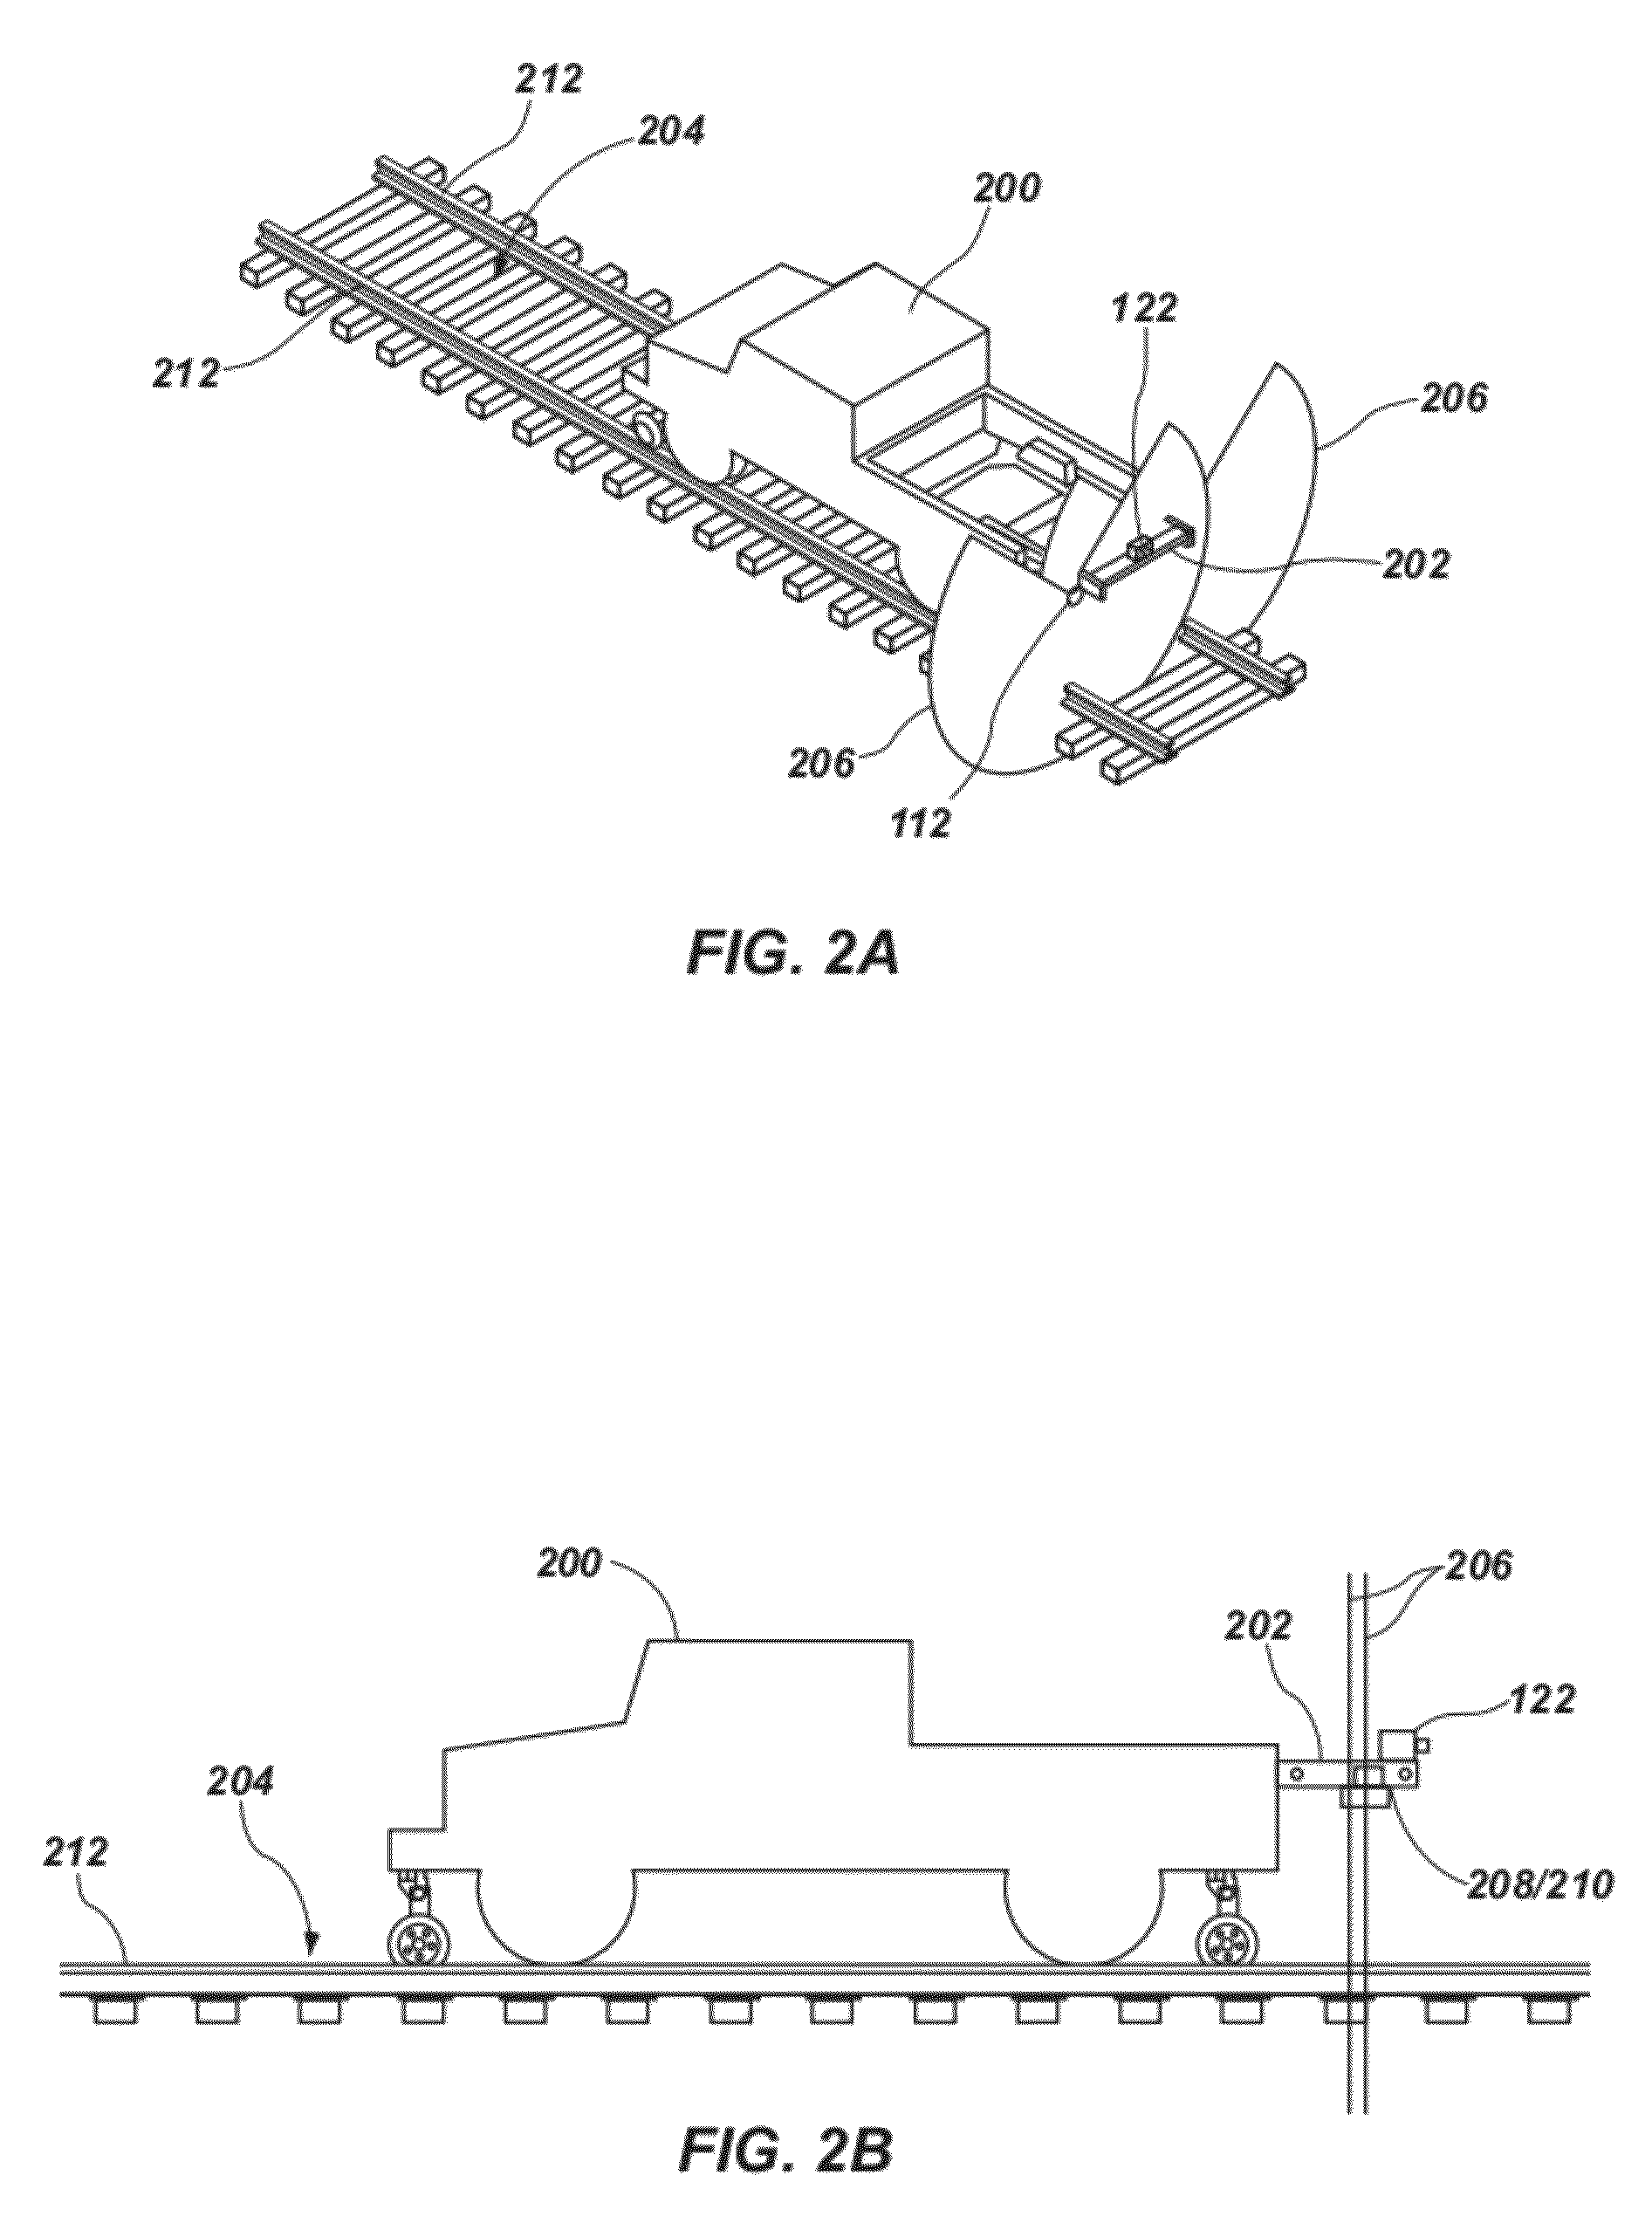 Ballast delivery and computation system and method